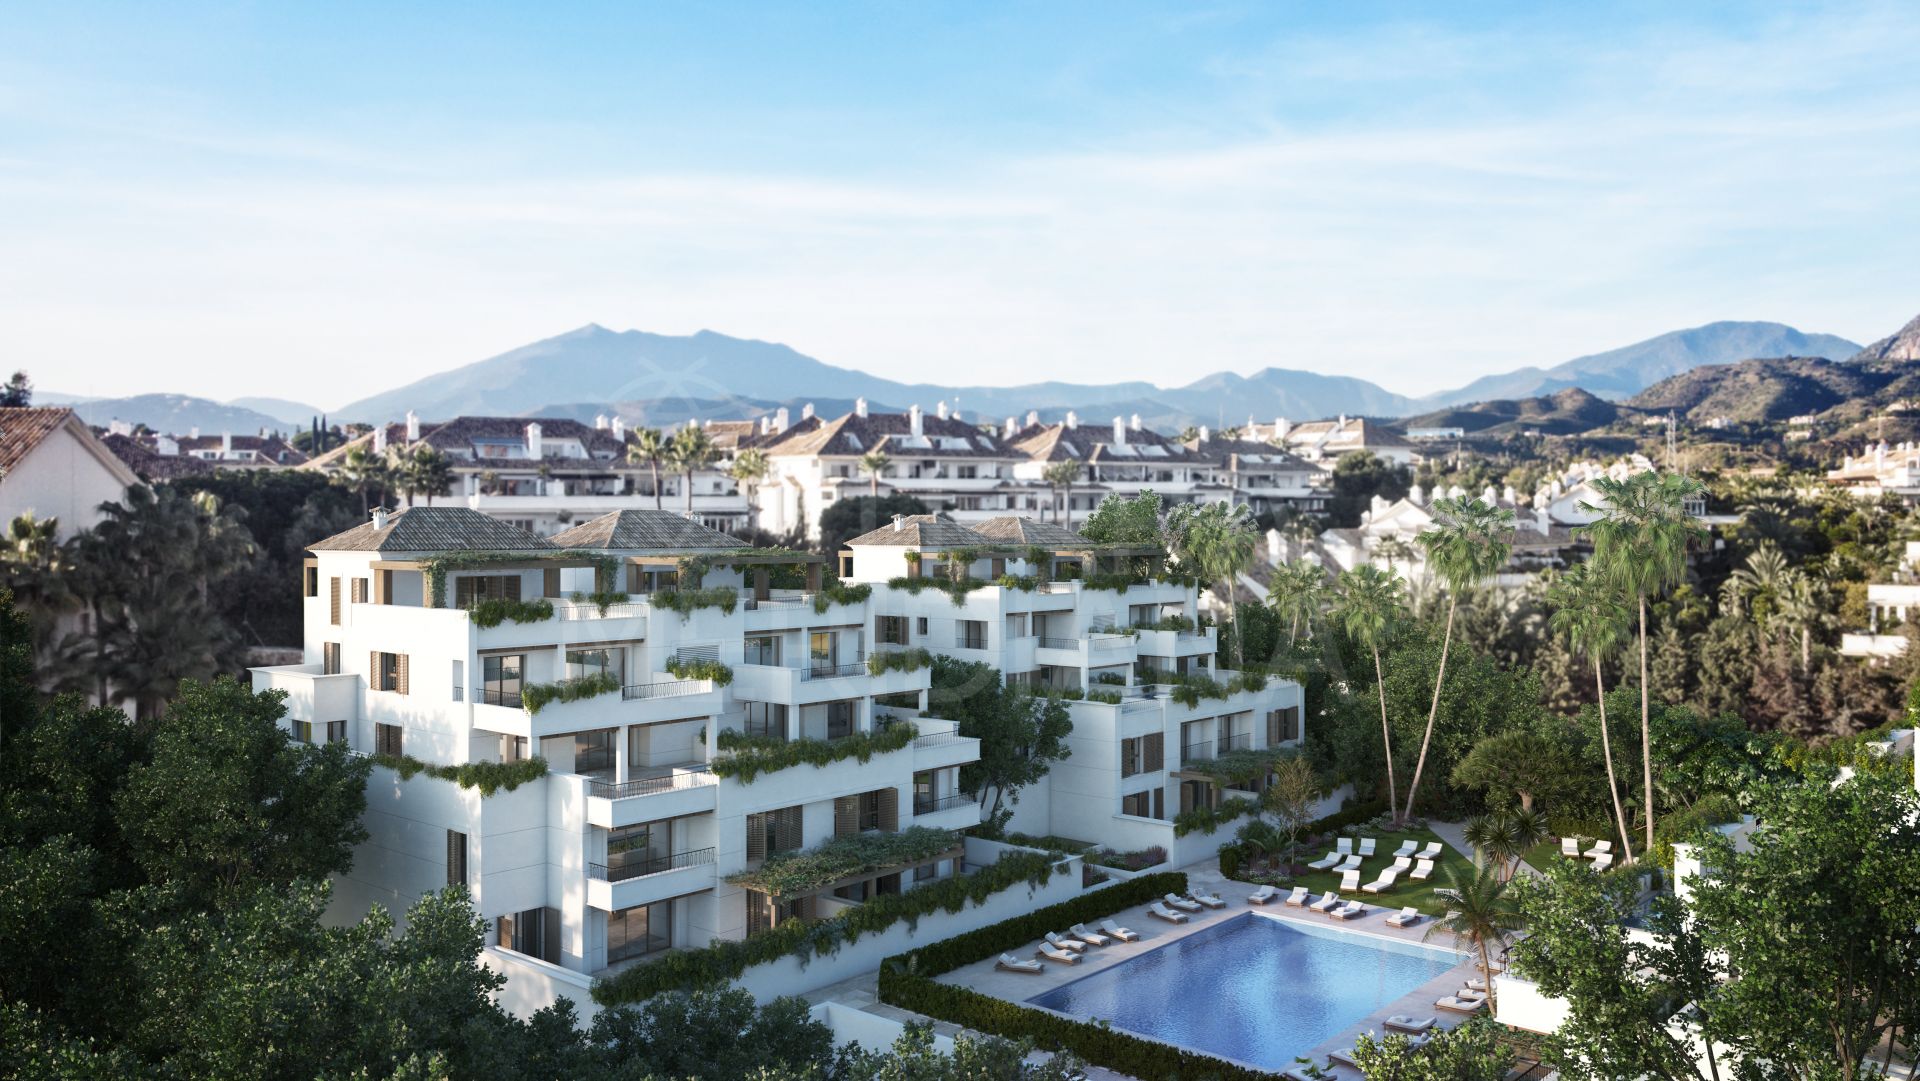 3 bedroom contemporary style penthouse apartment for sale in the Golden Mile, Marbella